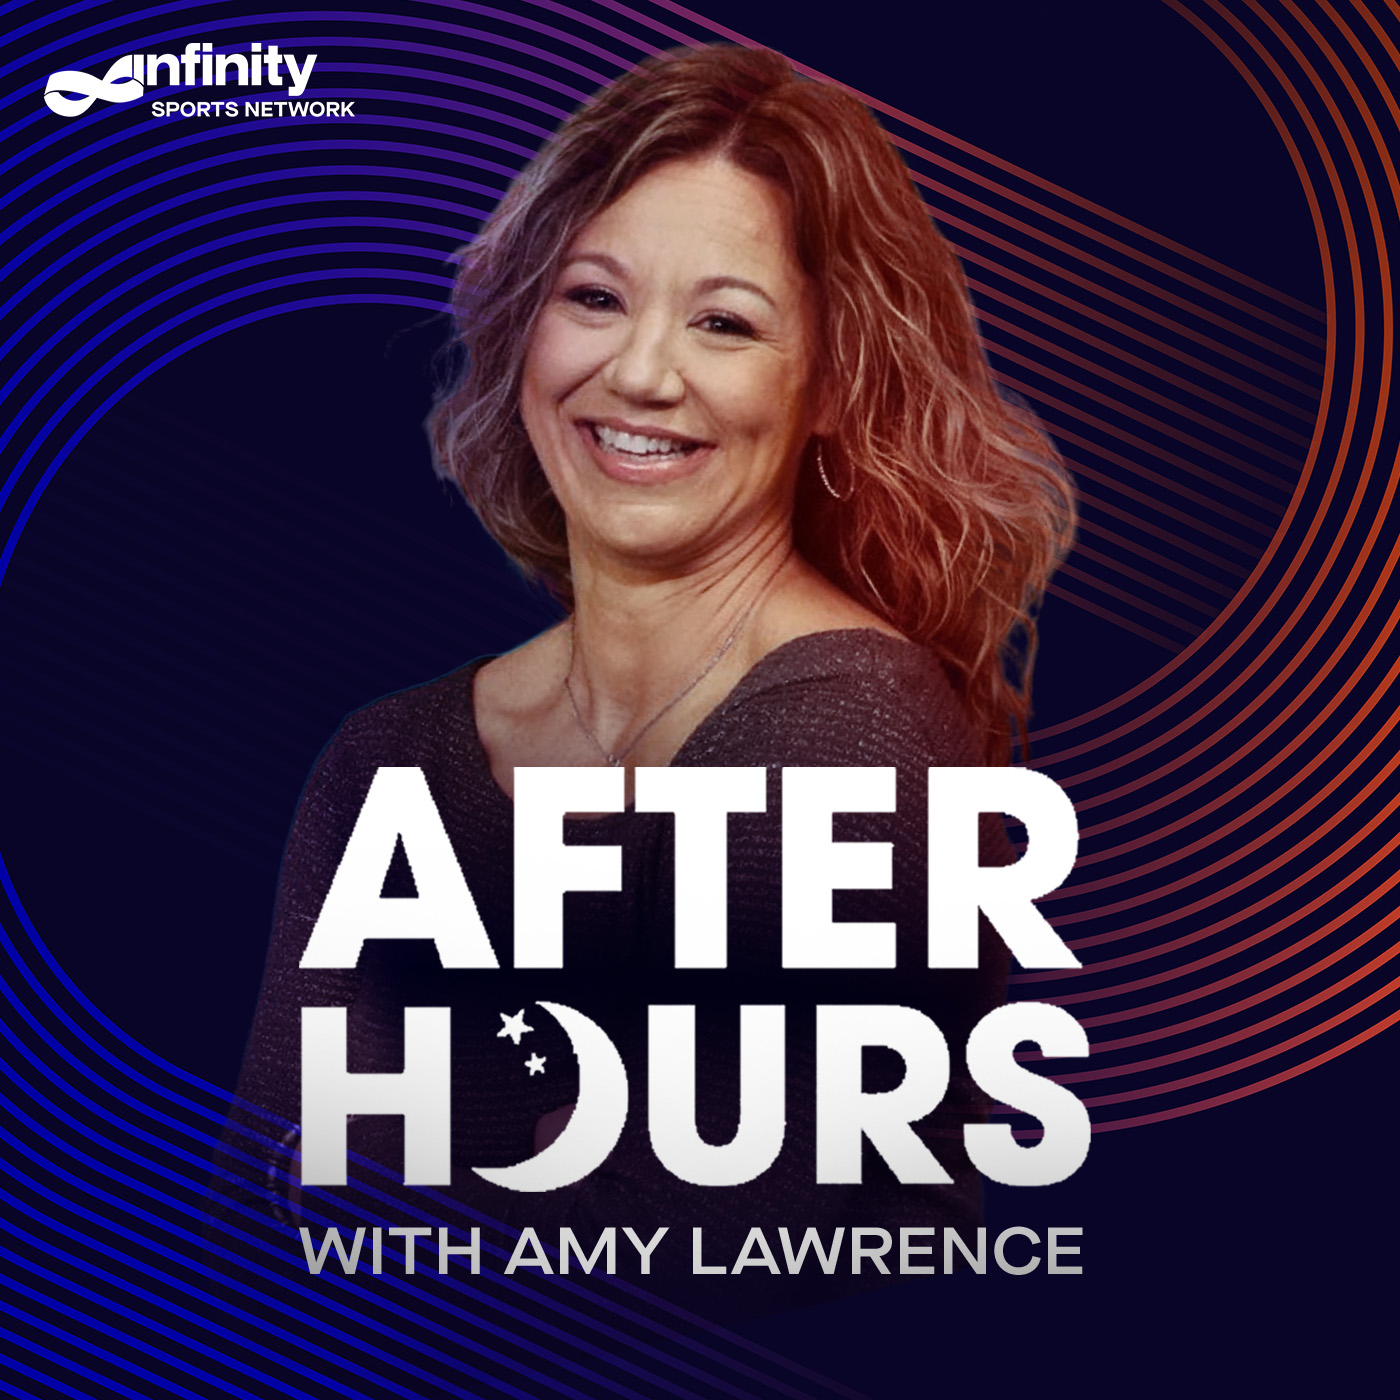 12-13-21 After Hours with Amy Lawrence PODCAST: Hour 1